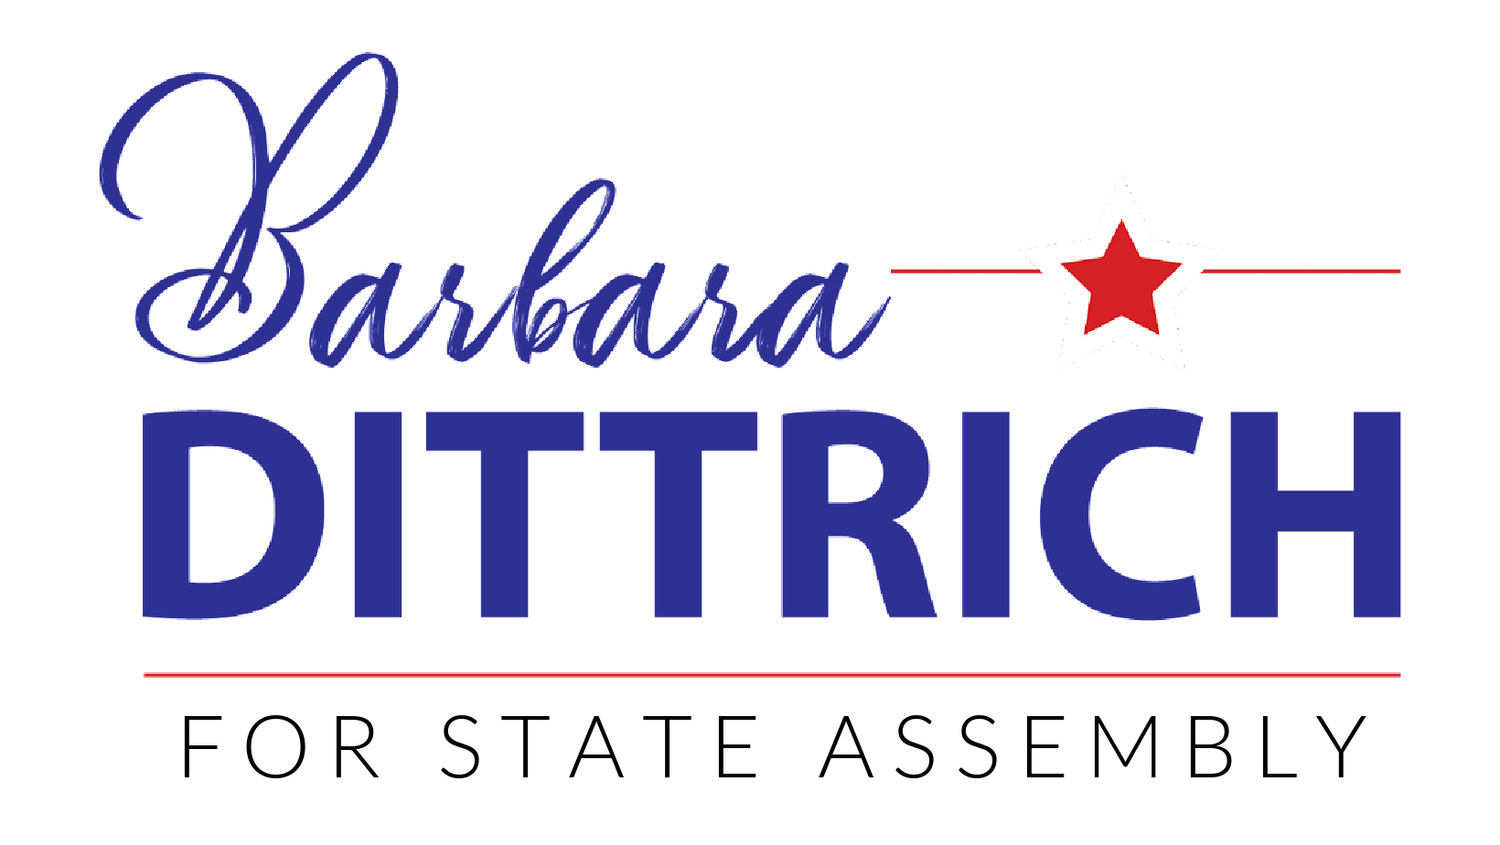 Barbara Dittrich for Wisconsin